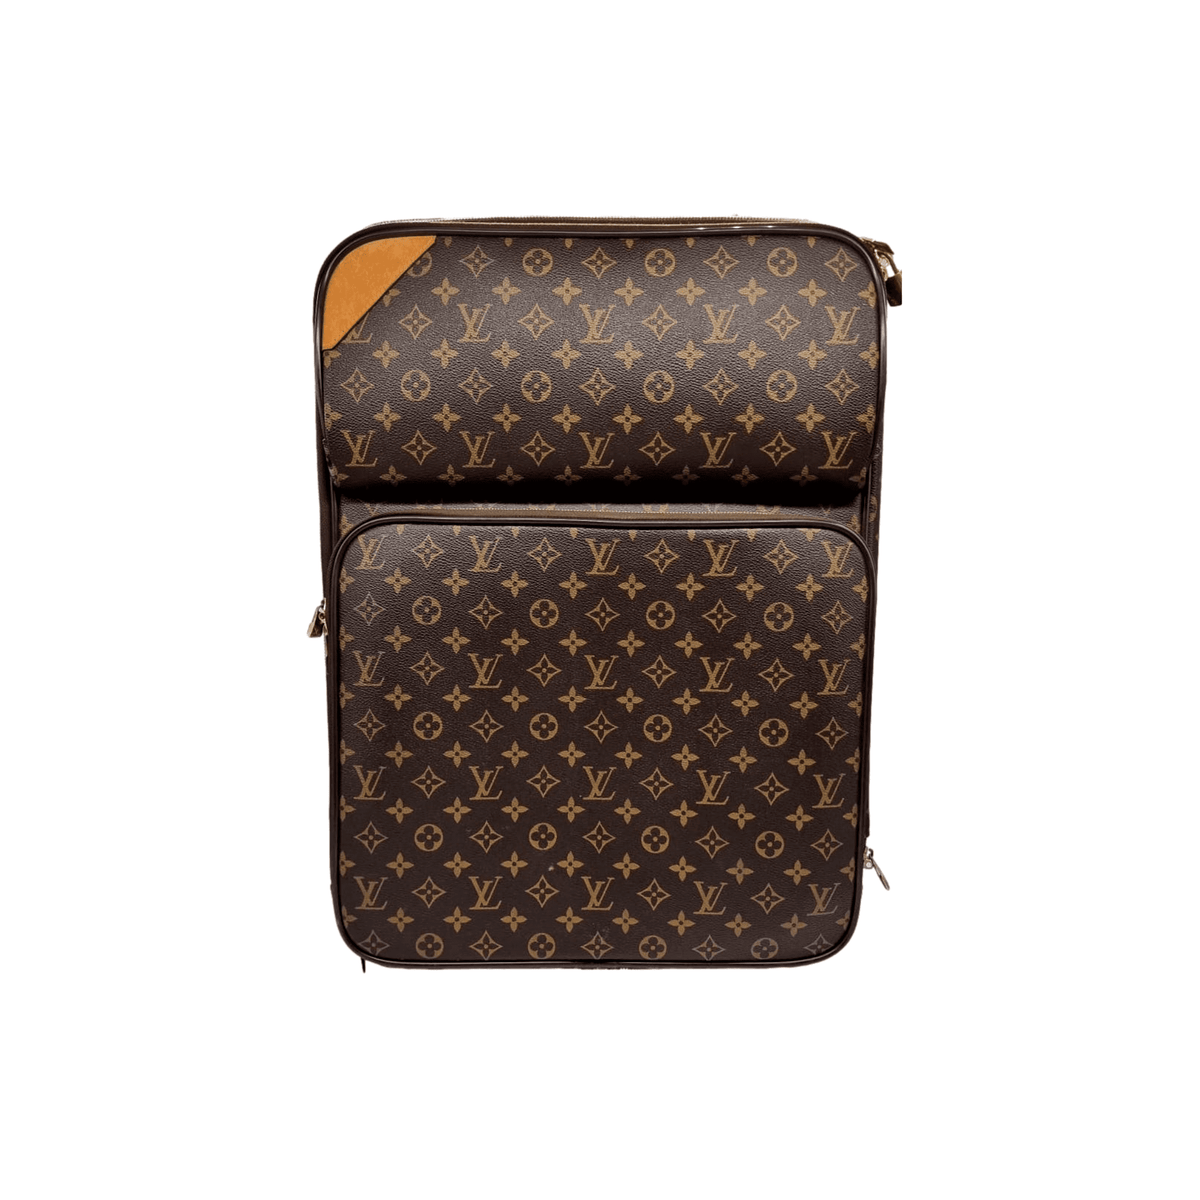 Authentication Service - Hermes Handbags and Wallets – Avenard Luxe